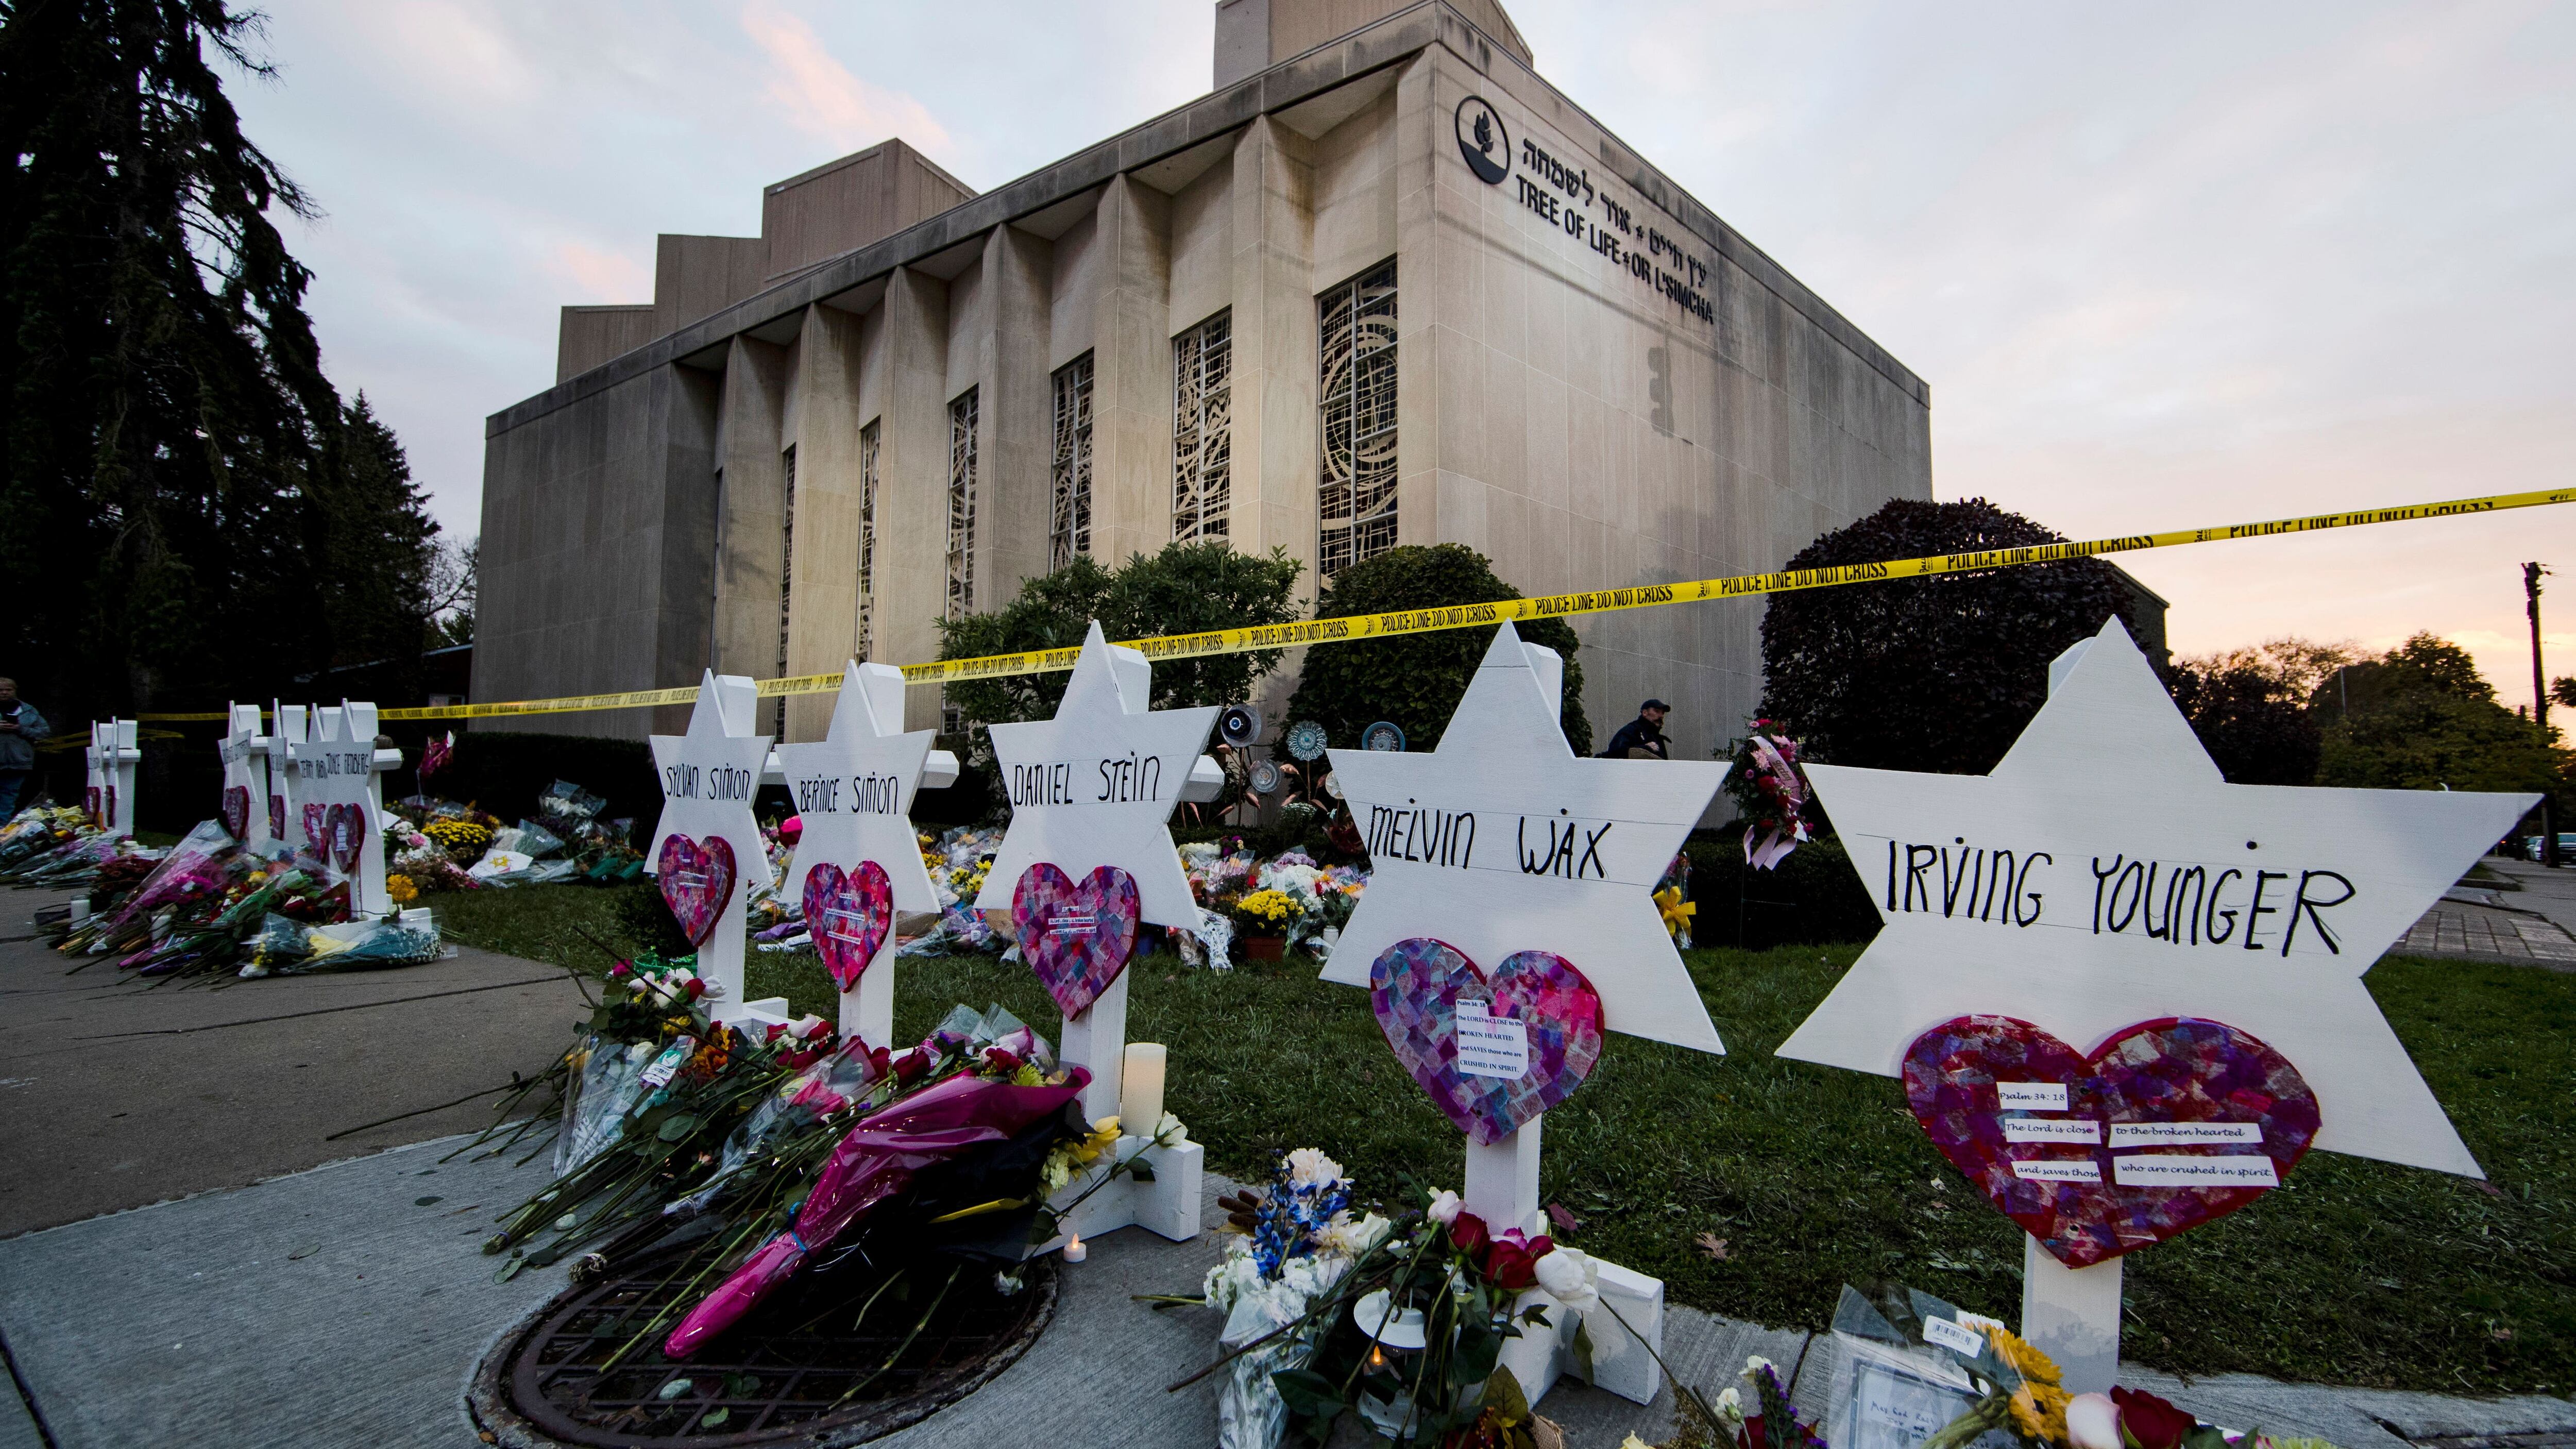 A makeshift memorial stands outside the Tree of Life Synagogue in the aftermath of the deadly shooting in Pittsburgh on October 29, 2018. Robert Bowers now faces the death penalty for the attack (Matt Rourke/AP/PA)